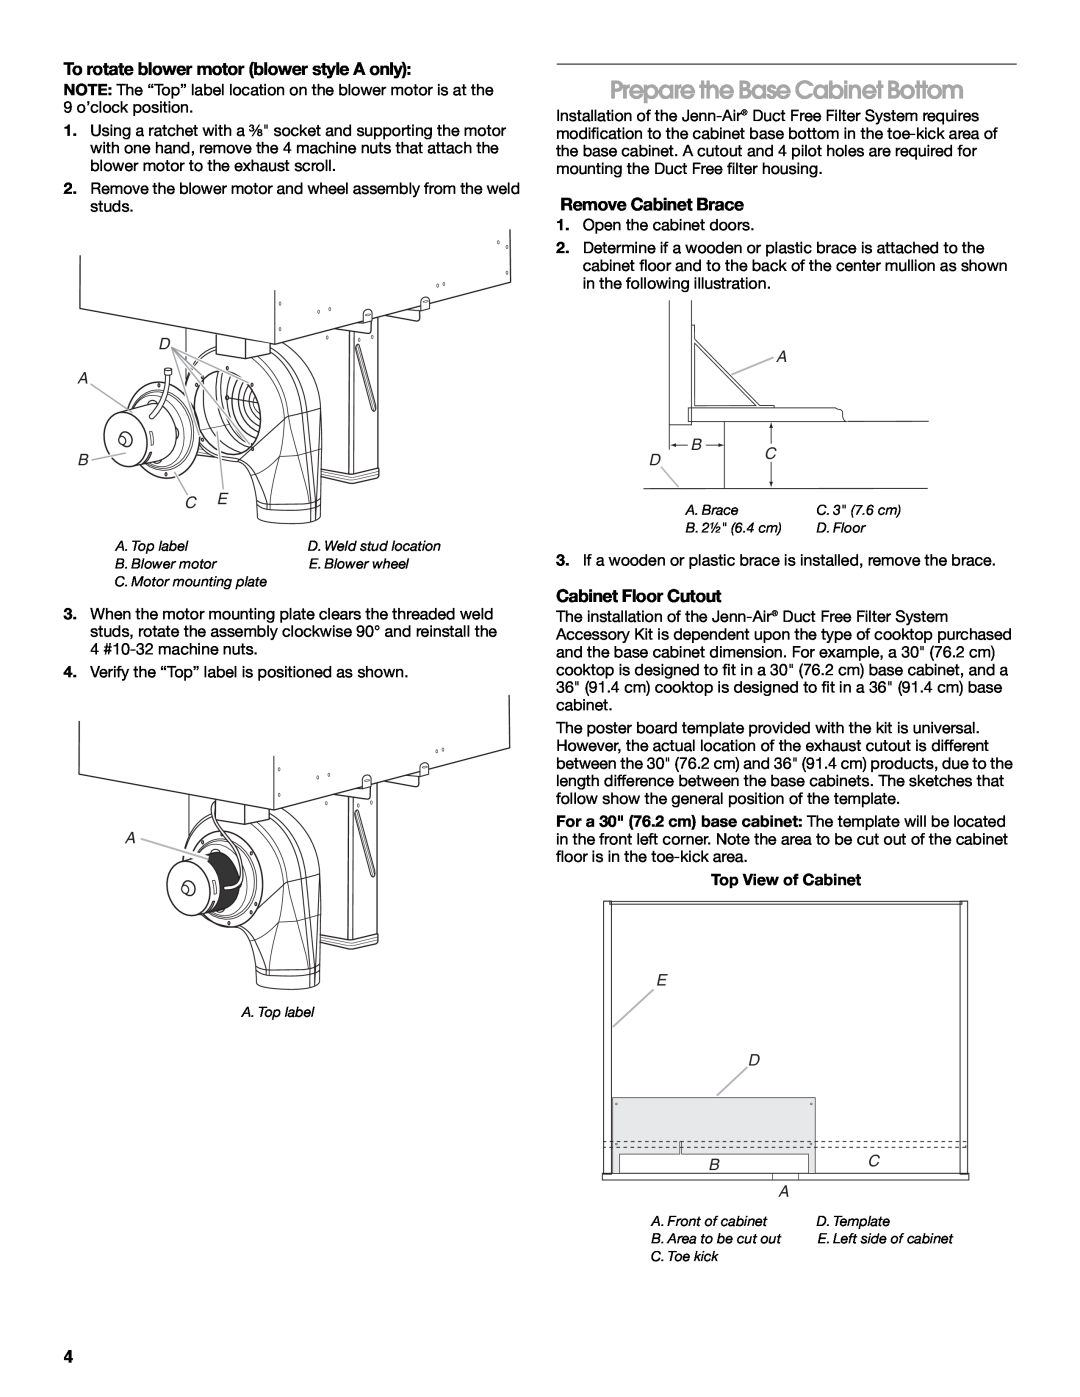 Jenn-Air W10439669A Prepare the Base Cabinet Bottom, To rotate blower motor blower style A only, Remove Cabinet Brace 